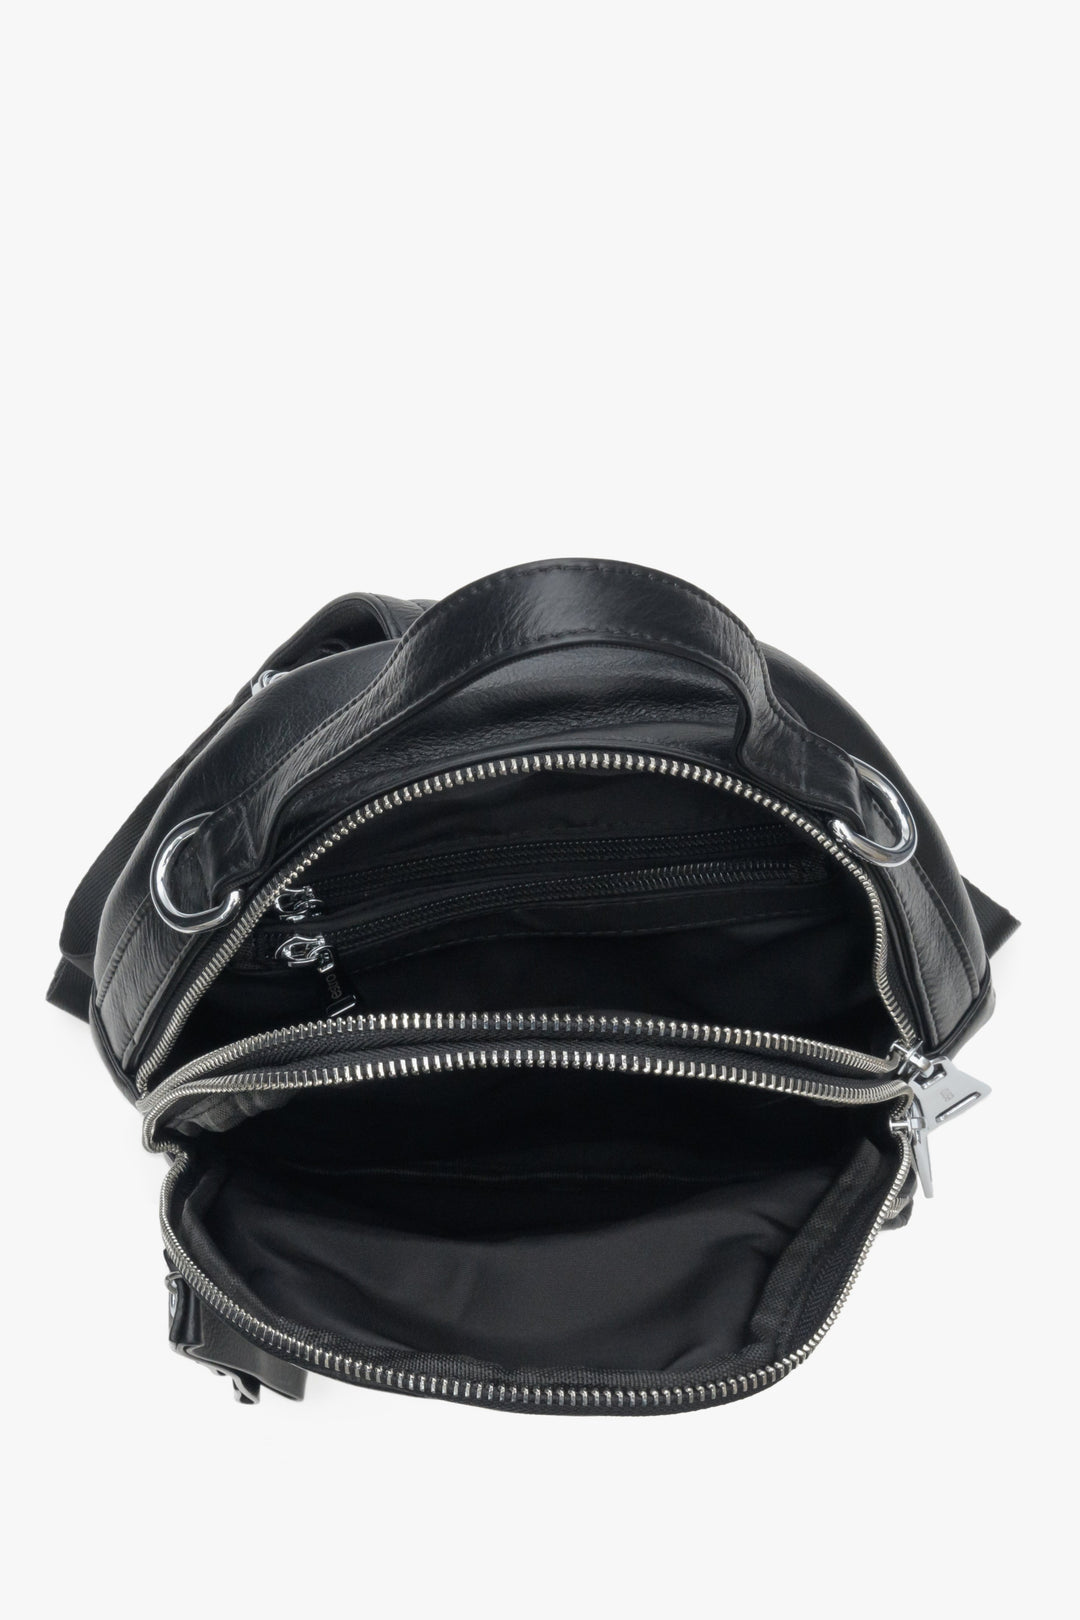 Women's black leather backpack by Estro - close-up of the interior of the model.